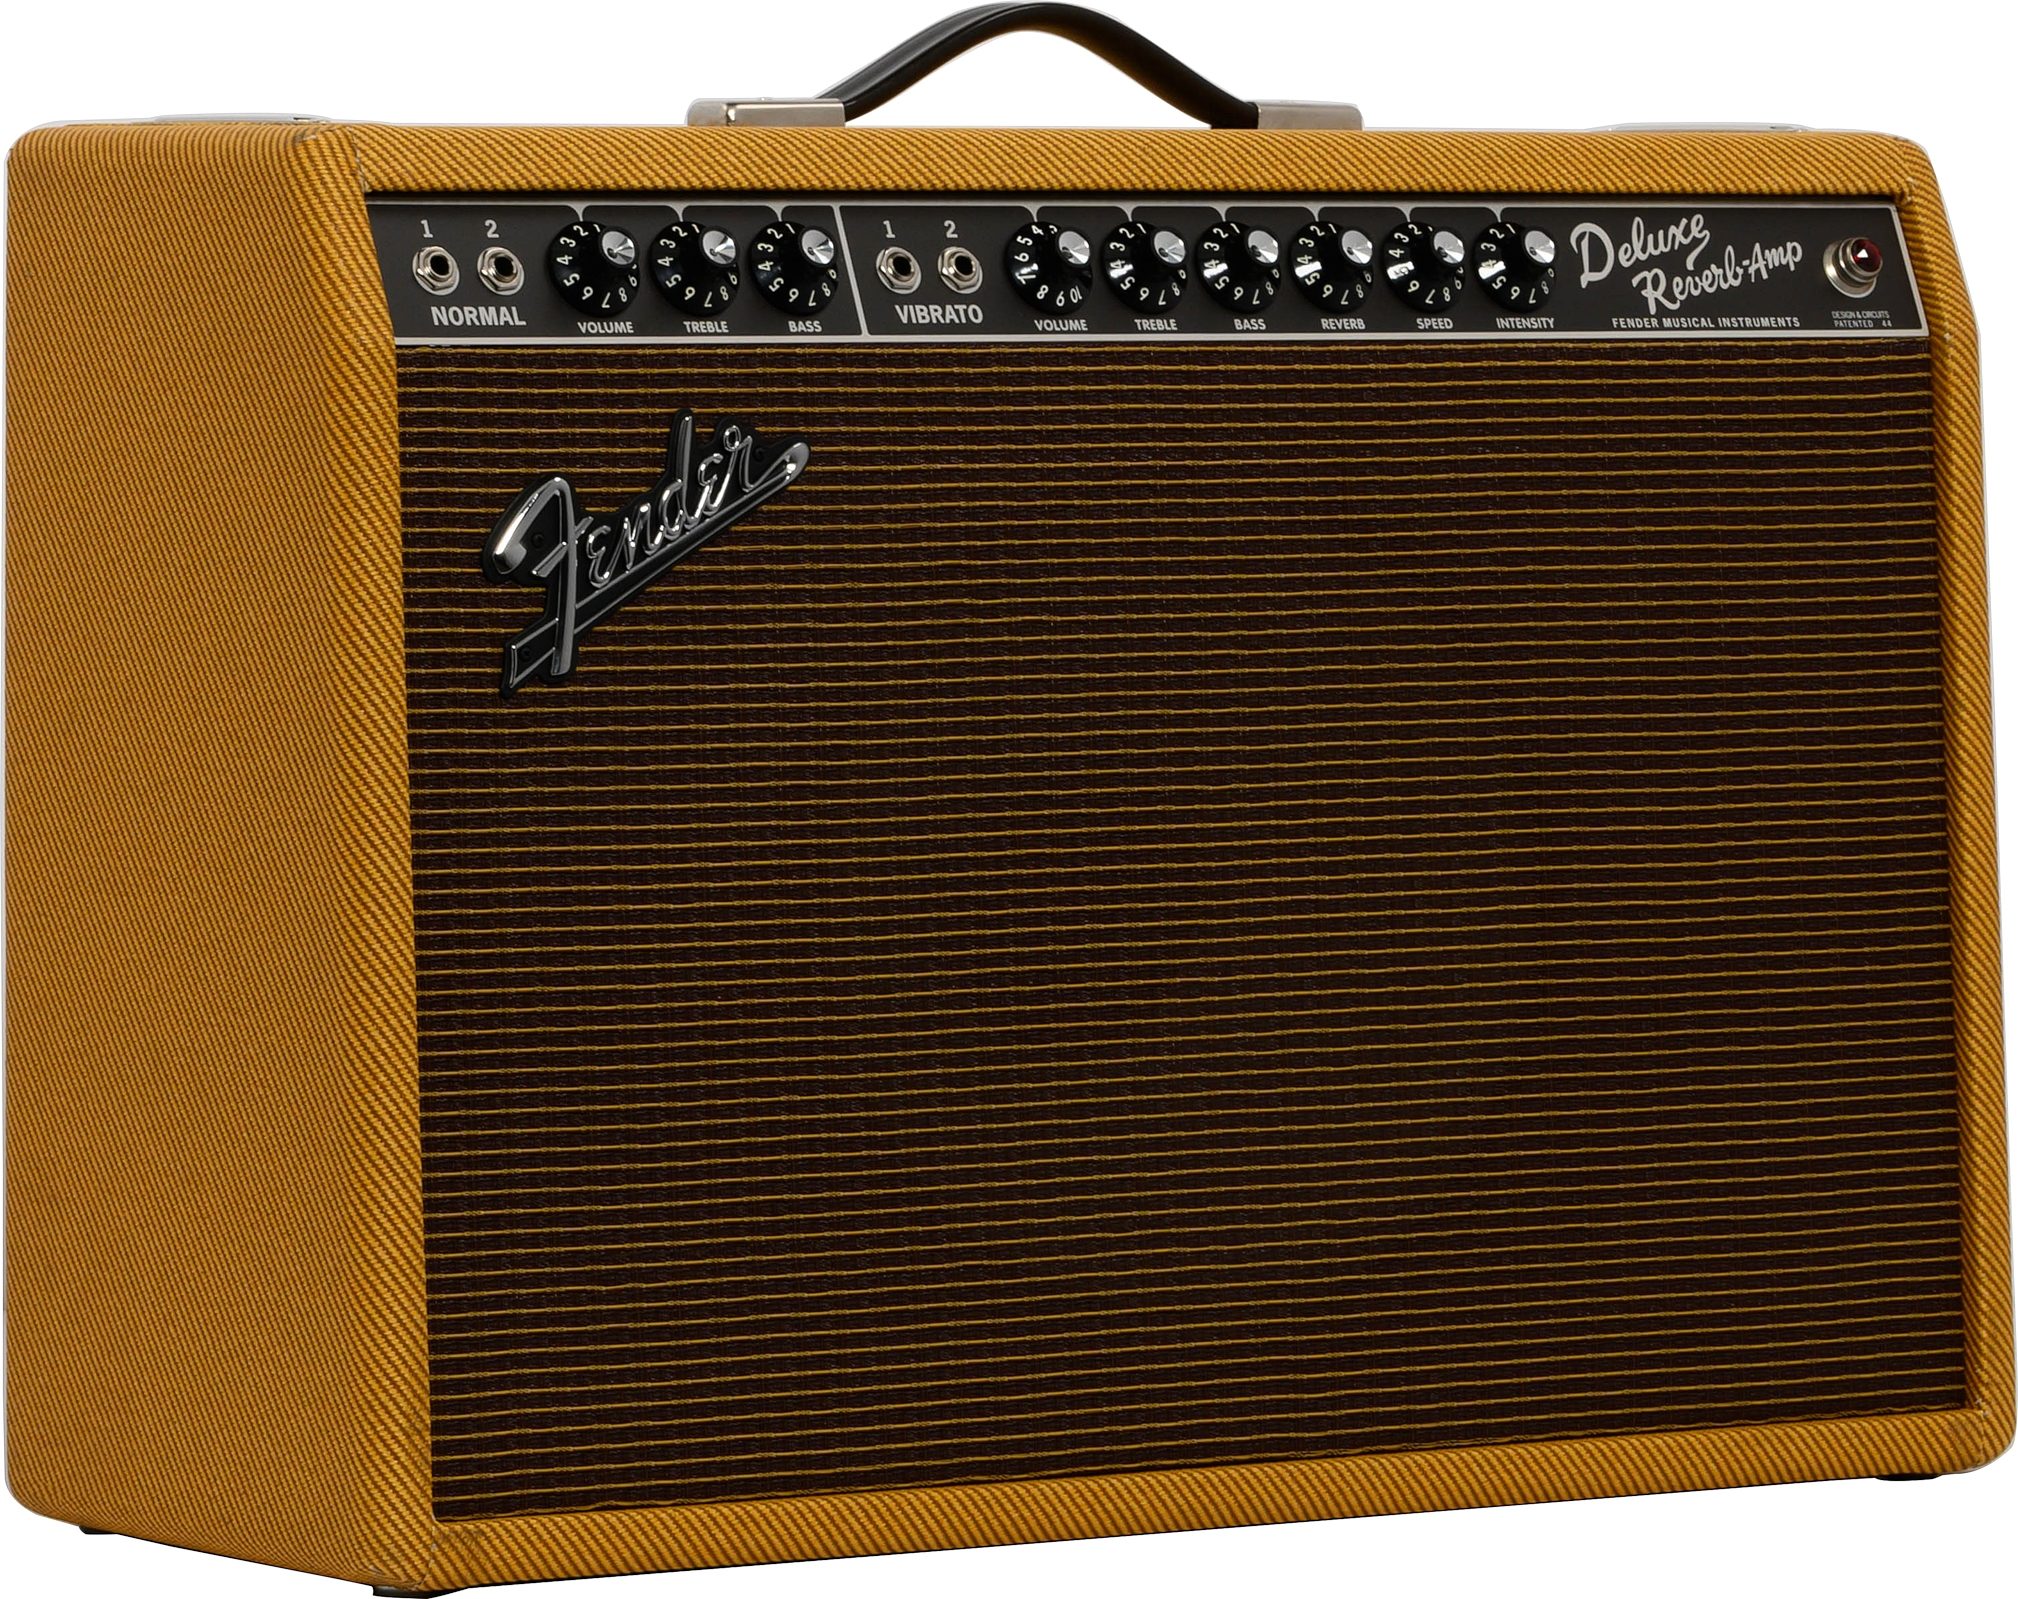 Fender Exclusive Limited Edition '65 Deluxe Reverb Tweed Amp